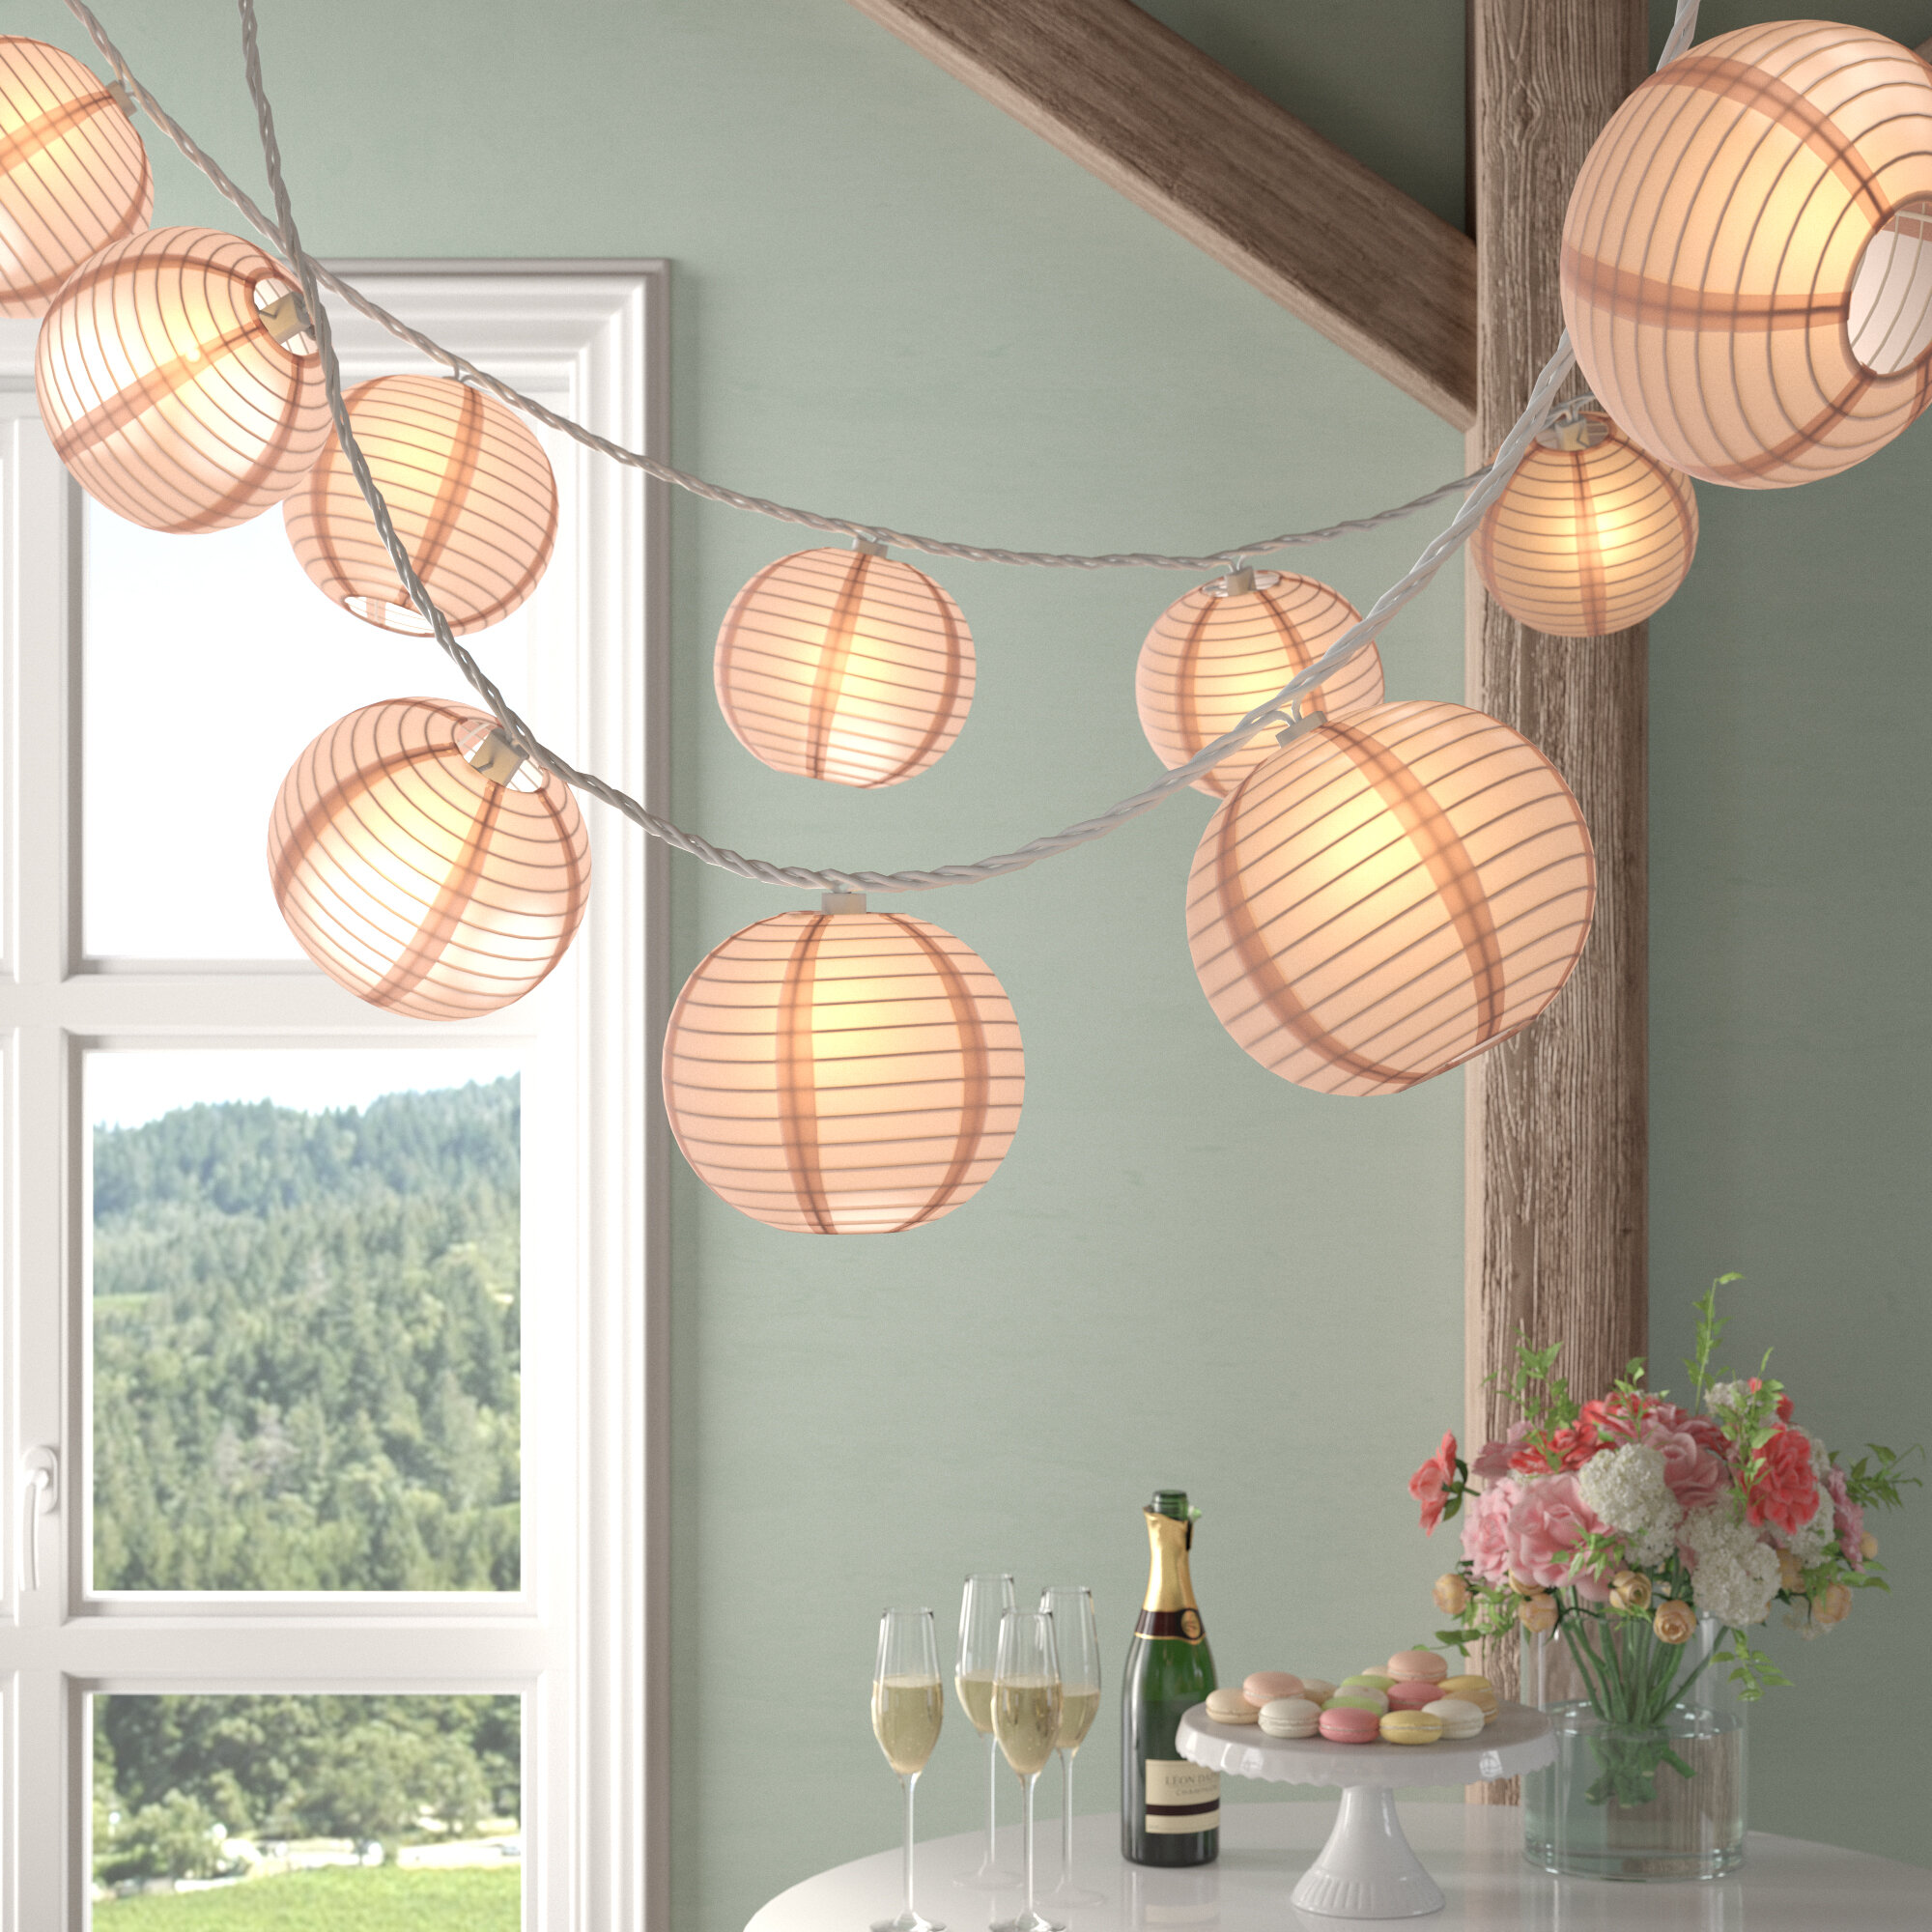 Paper lantern string lights used to decorate the kitchen and living room